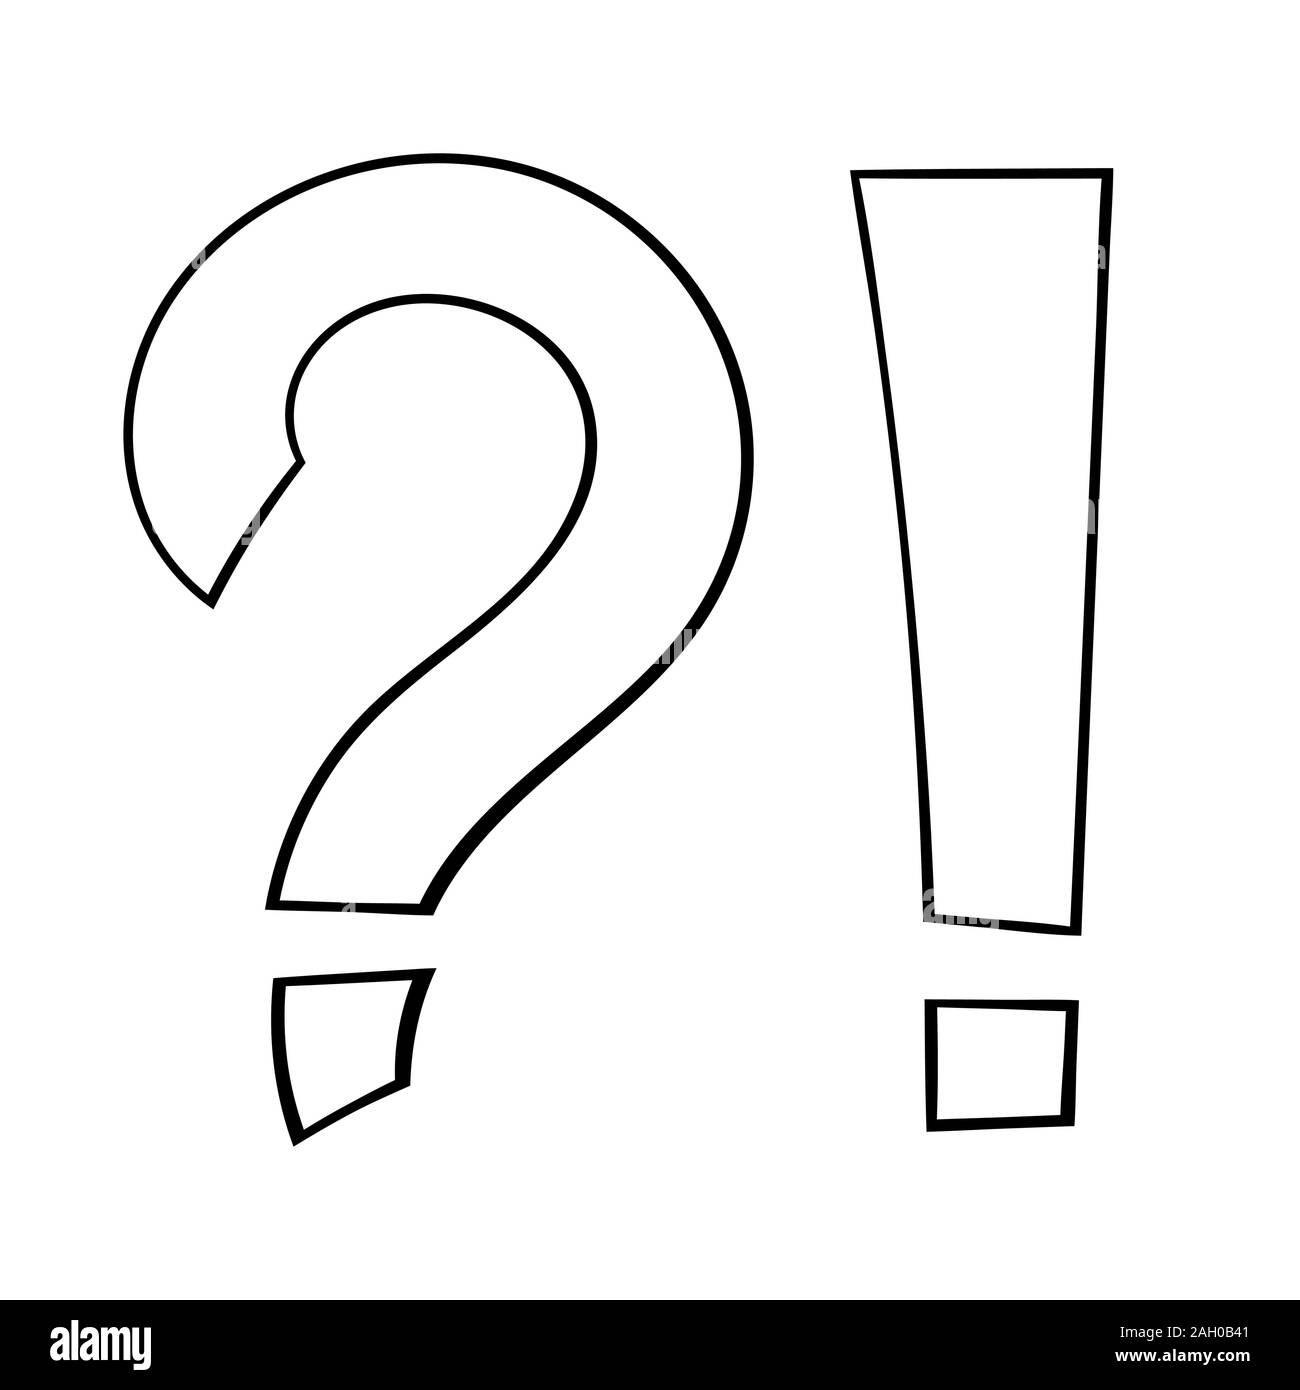 Punctuation symbols. Question mark and exclamation mark. Hand drawn sketch Stock Vector